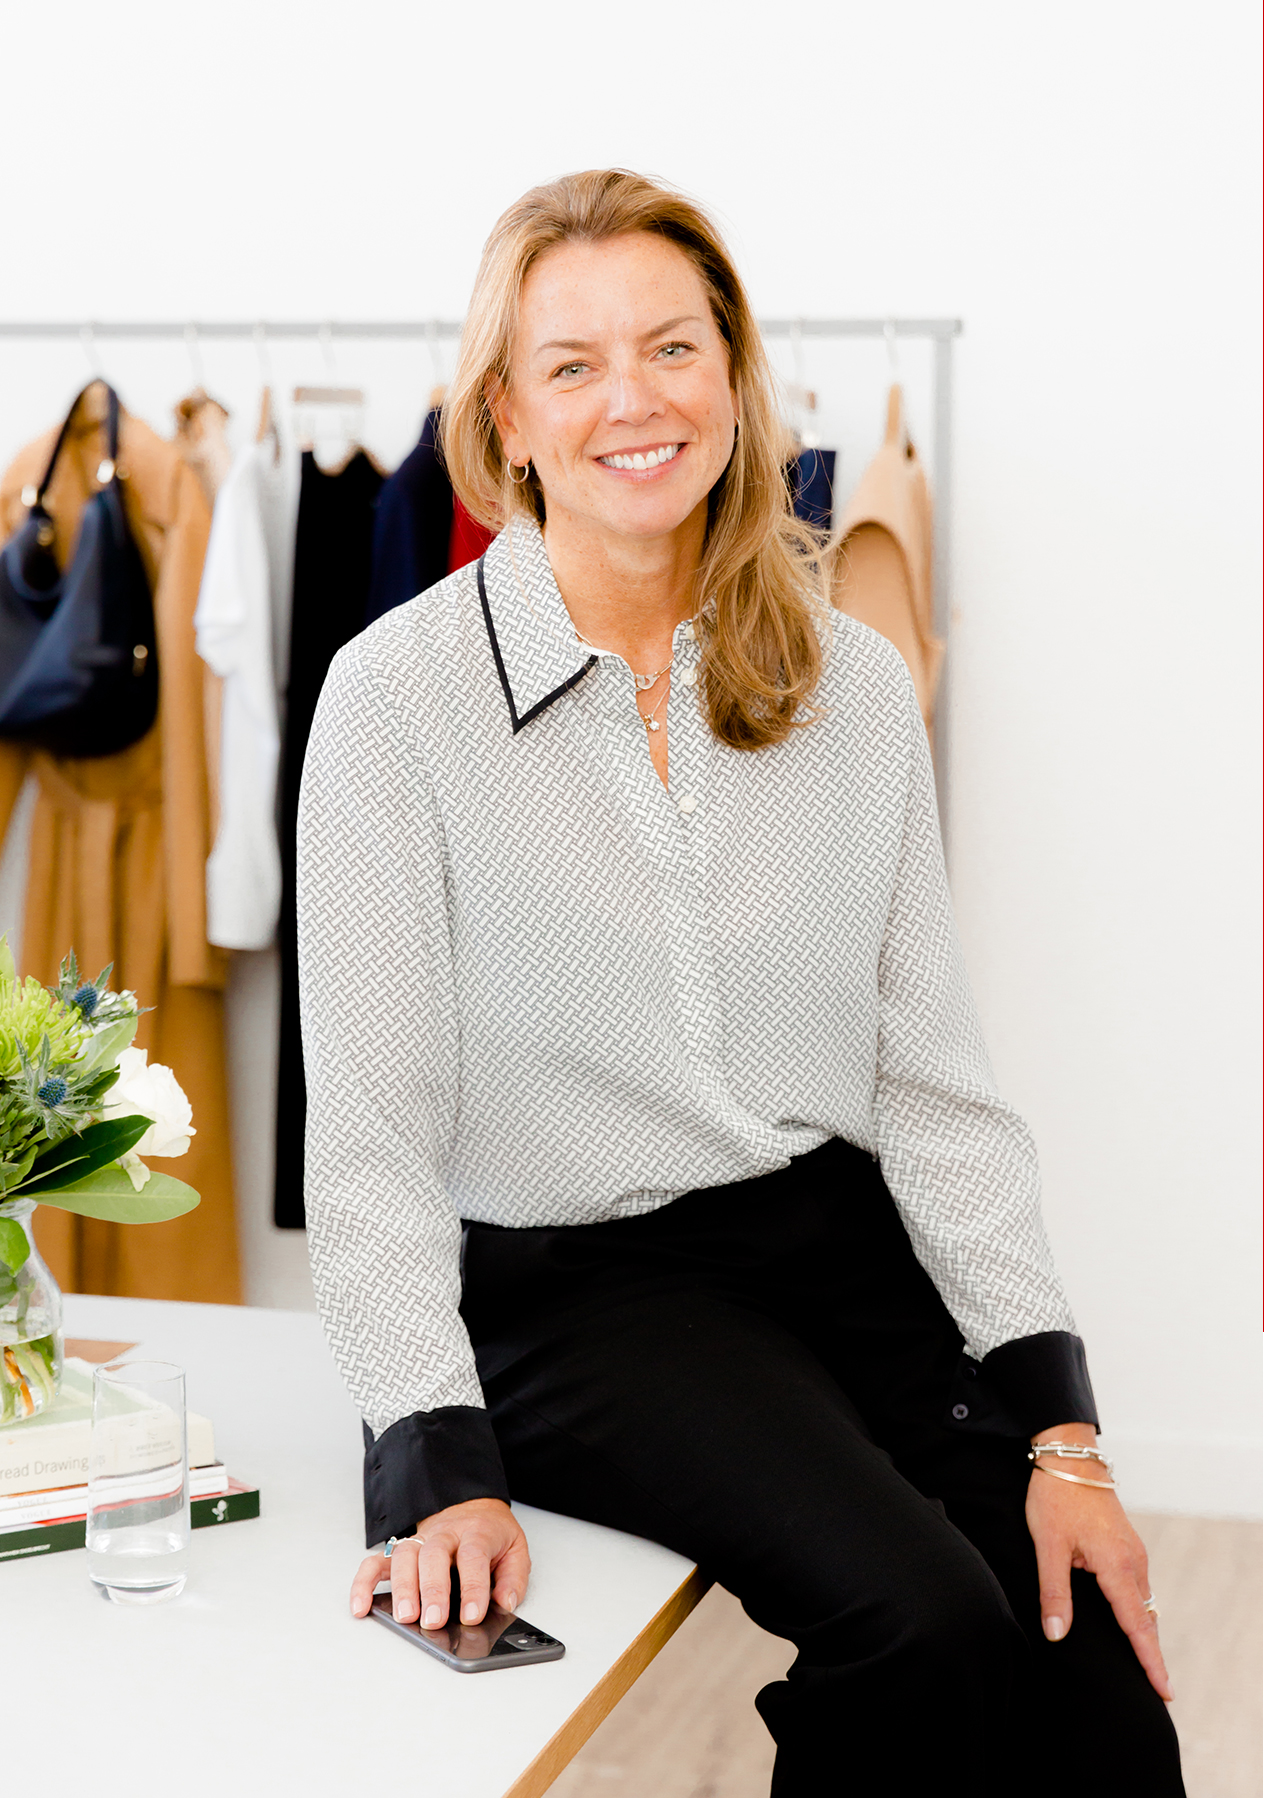  Hobbs' Product Director, Sally Ambrose, photographed wearing a silk shirt while leaning on an office desk.